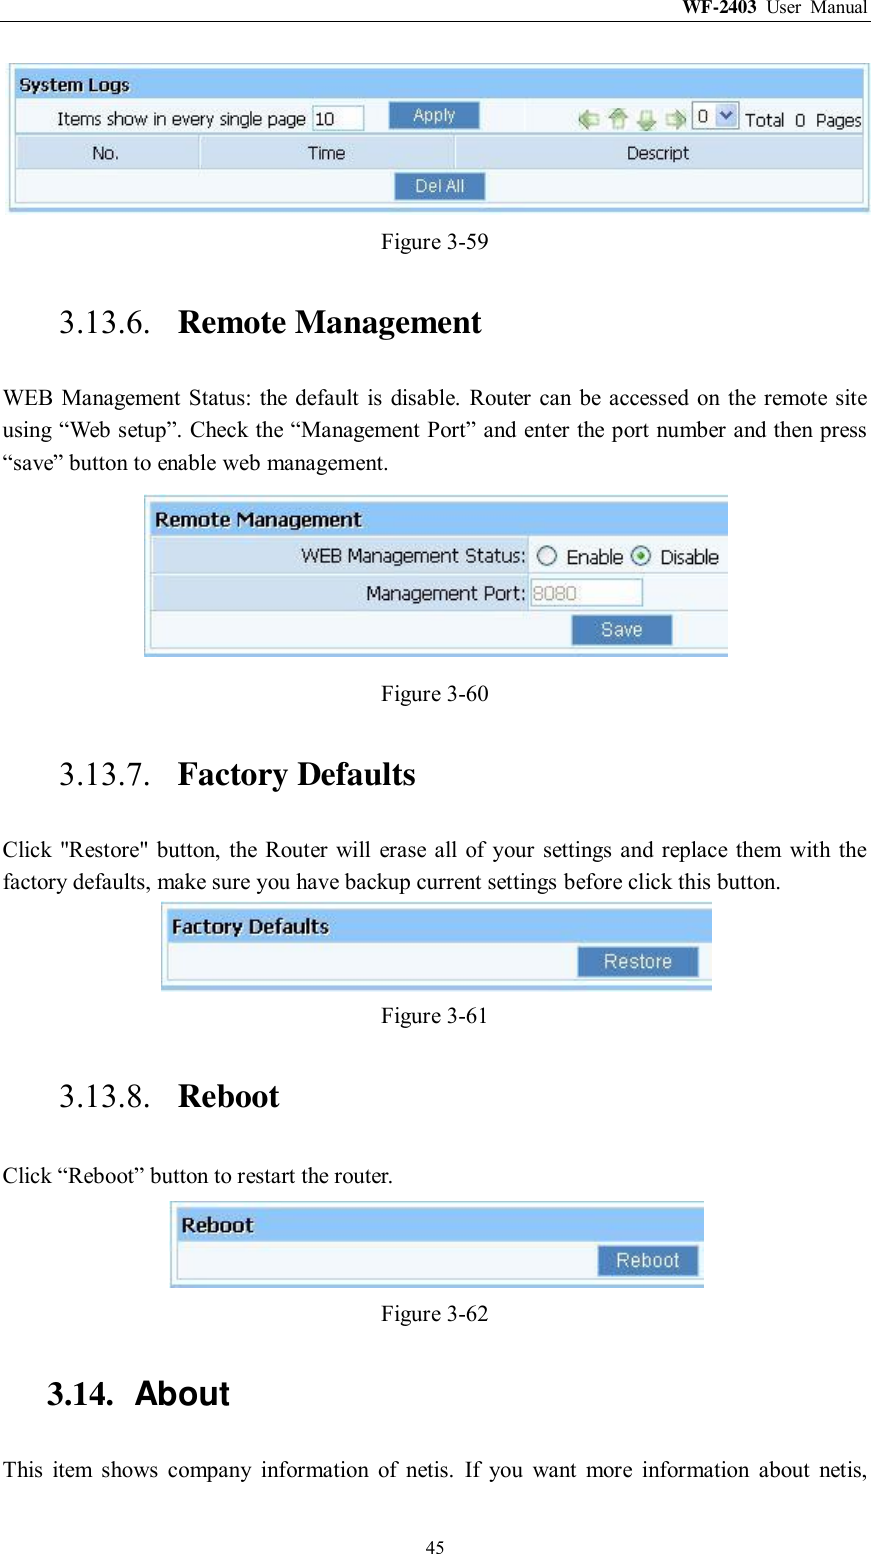 WF-2403  User  Manual  45  Figure 3-59 3.13.6. Remote Management WEB  Management Status:  the  default is disable.  Router  can be  accessed on the remote site using “Web setup”. Check the “Management Port” and enter the port number and then press “save” button to enable web management.  Figure 3-60 3.13.7. Factory Defaults Click &quot;Restore&quot;  button,  the  Router  will  erase  all of  your  settings  and replace  them  with the factory defaults, make sure you have backup current settings before click this button.  Figure 3-61 3.13.8. Reboot Click “Reboot” button to restart the router.  Figure 3-62 3.14.  About This  item  shows  company  information  of  netis.  If  you  want  more  information  about  netis, 